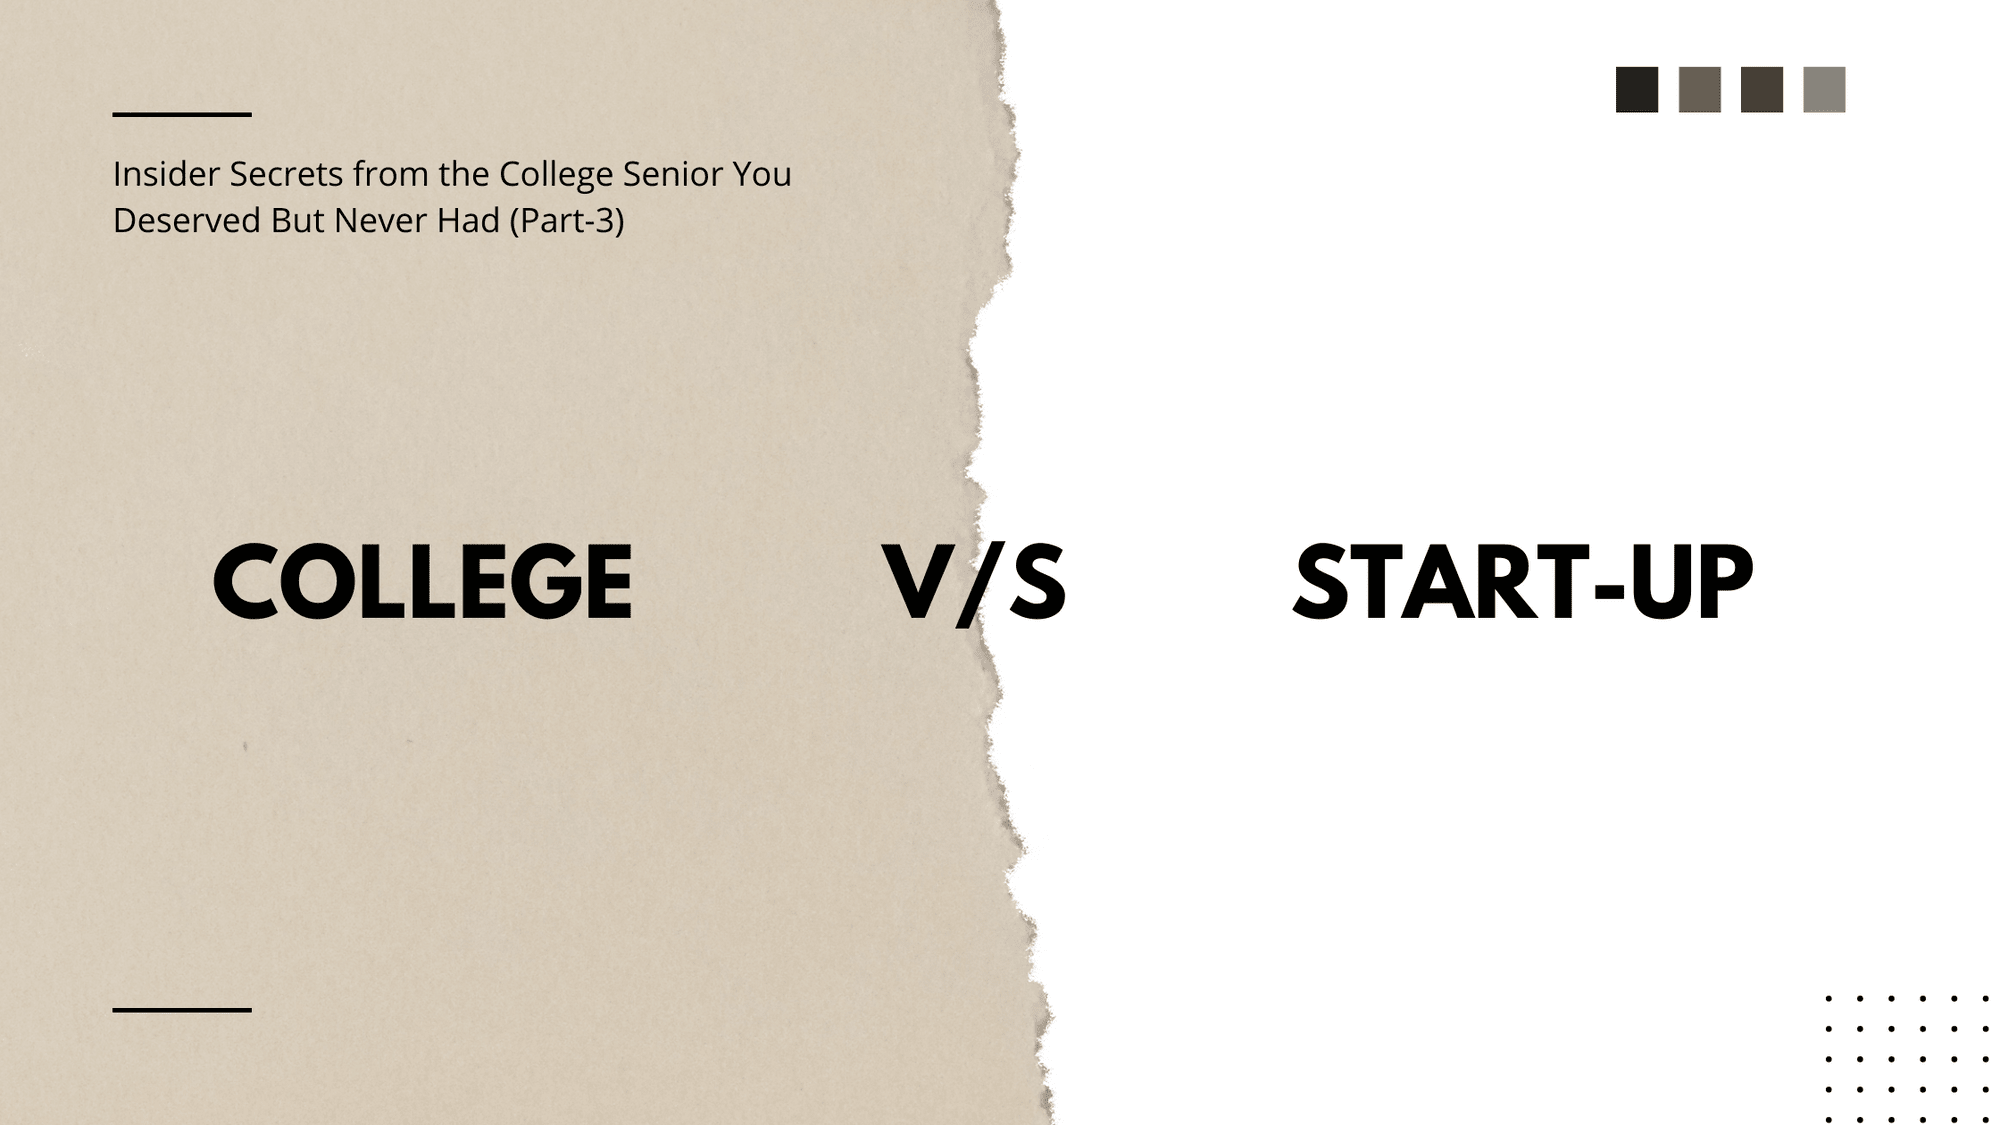 Who wins in College v/s Start-up? Insider Secrets from the College Senior You Deserved But Never Had (Part 3)